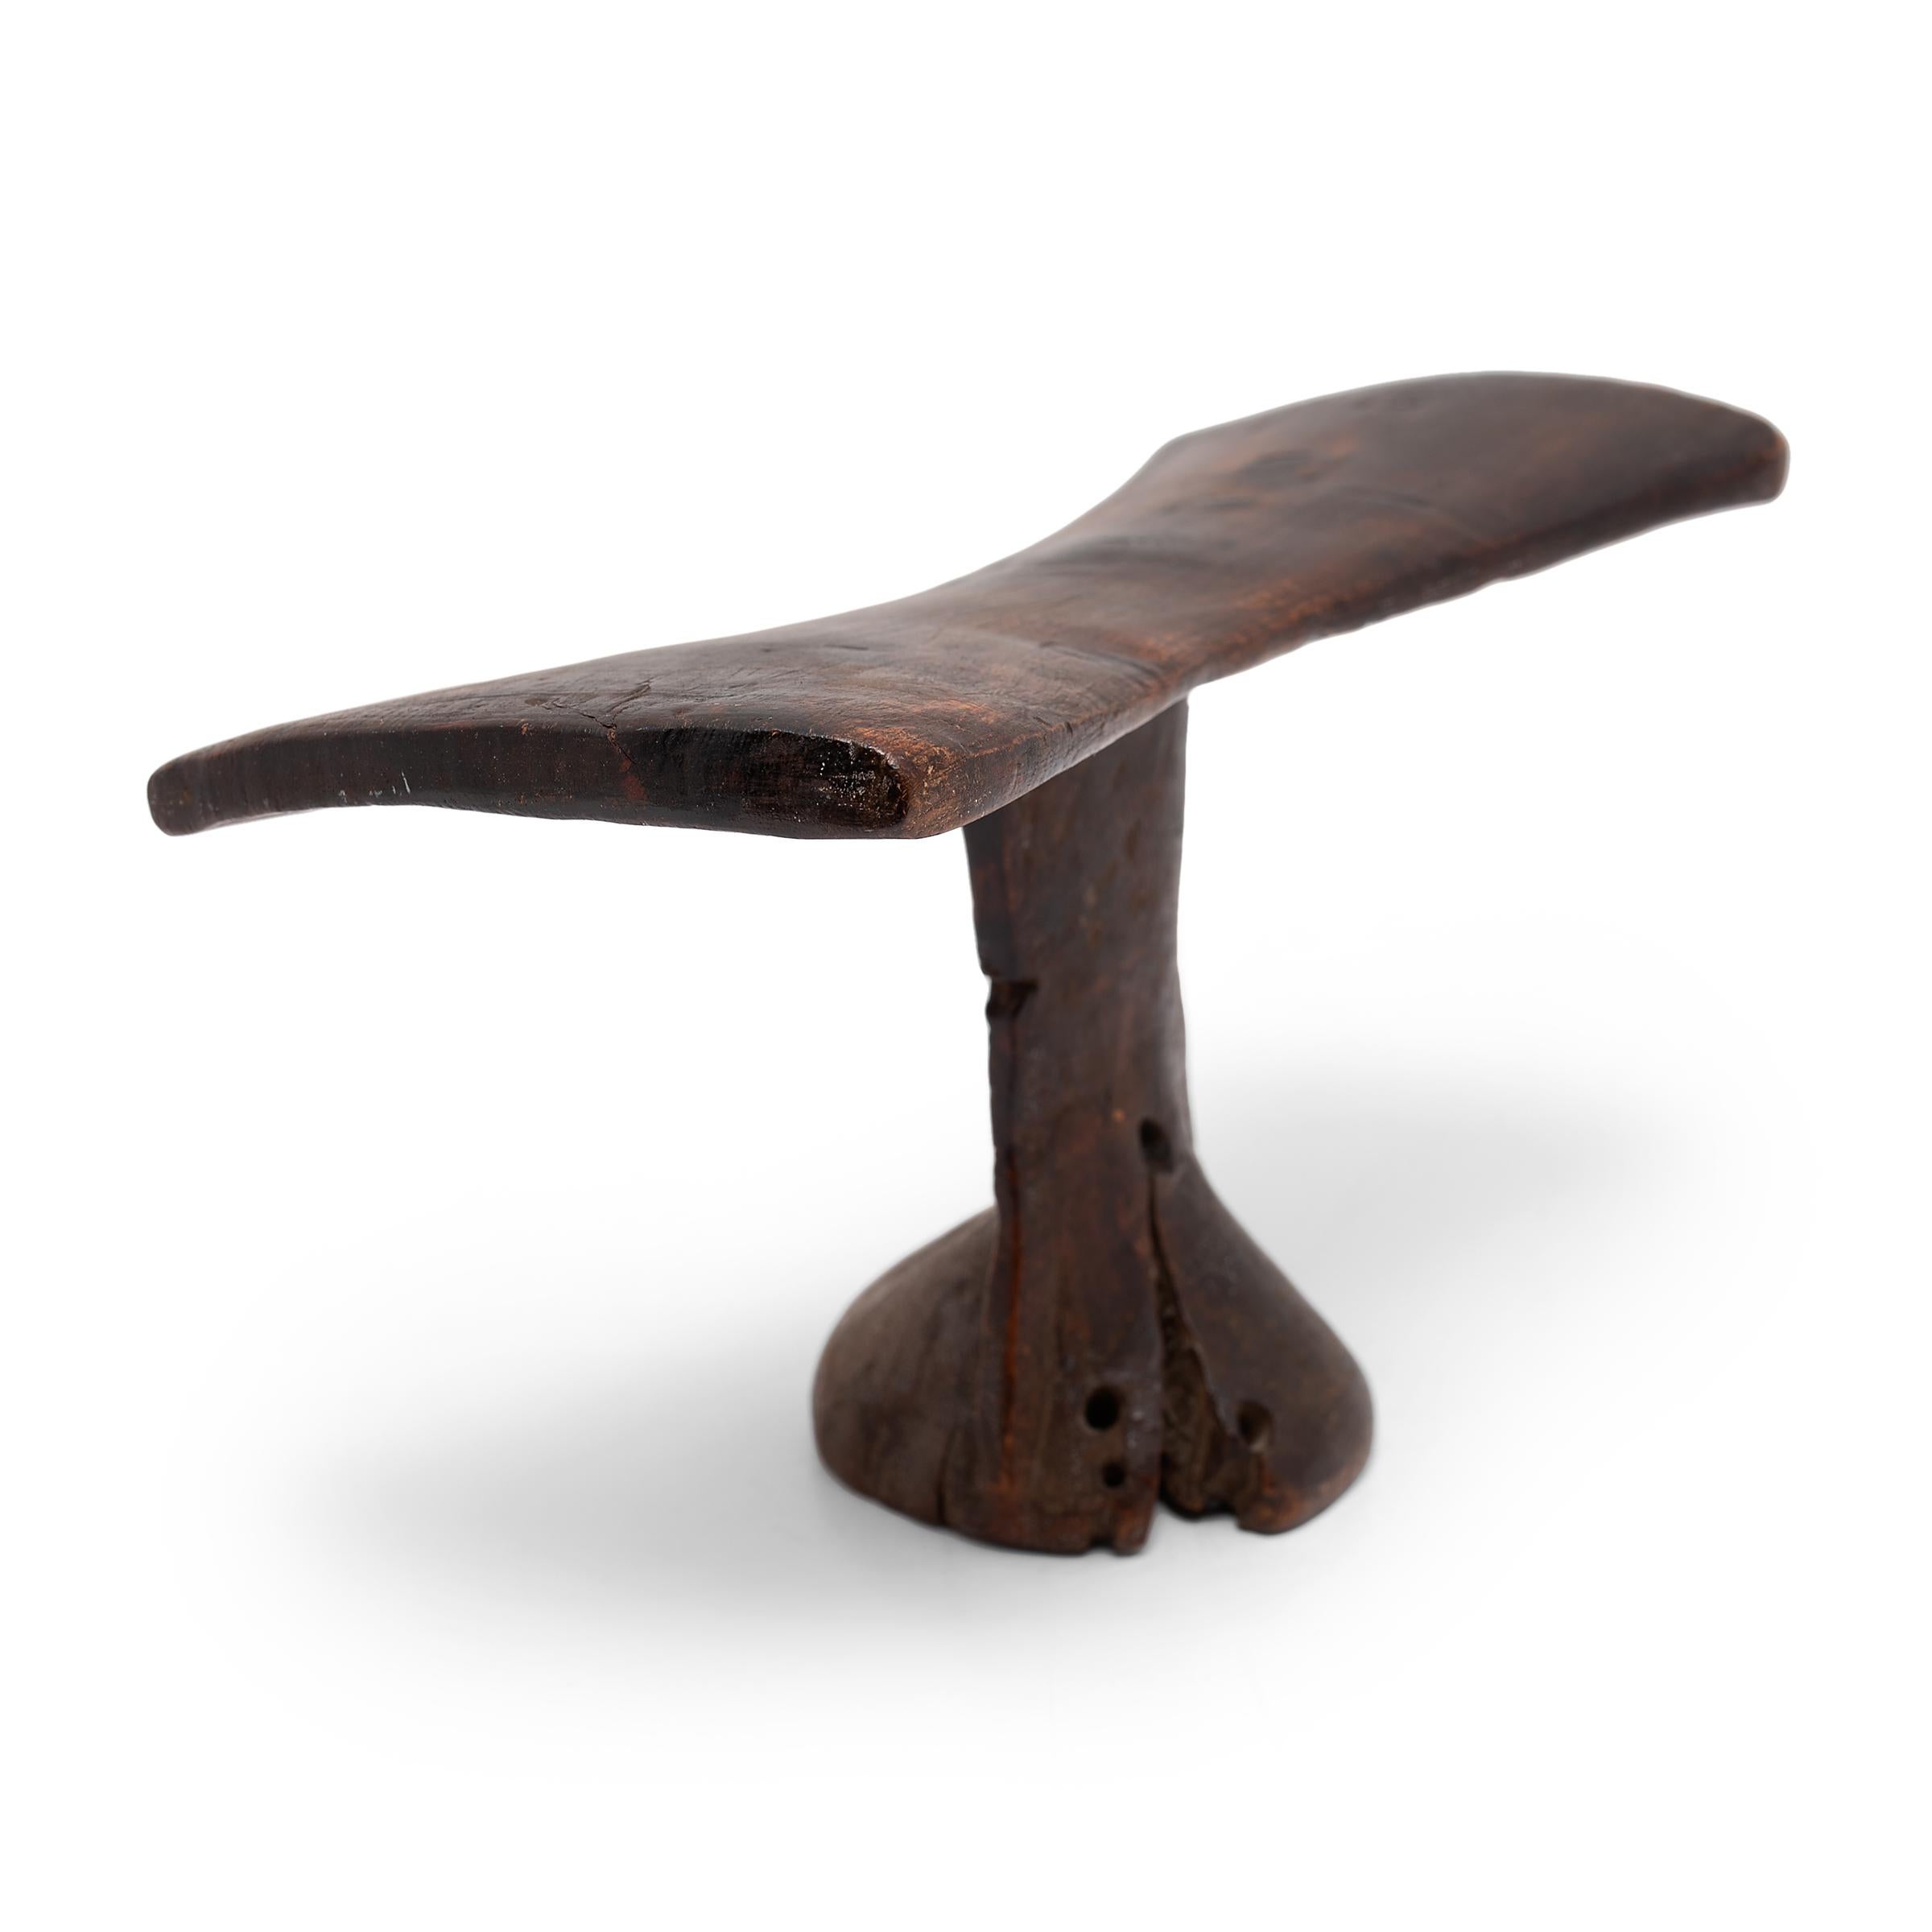 This headrest comes from 20th century Kenya, hand-carved from one piece of indigenous wood. Headrests held great value to North Western nomadic pastoral tribes of Kenya as they have a cultural custom of wearing elaborate coiffures. Headrests helped